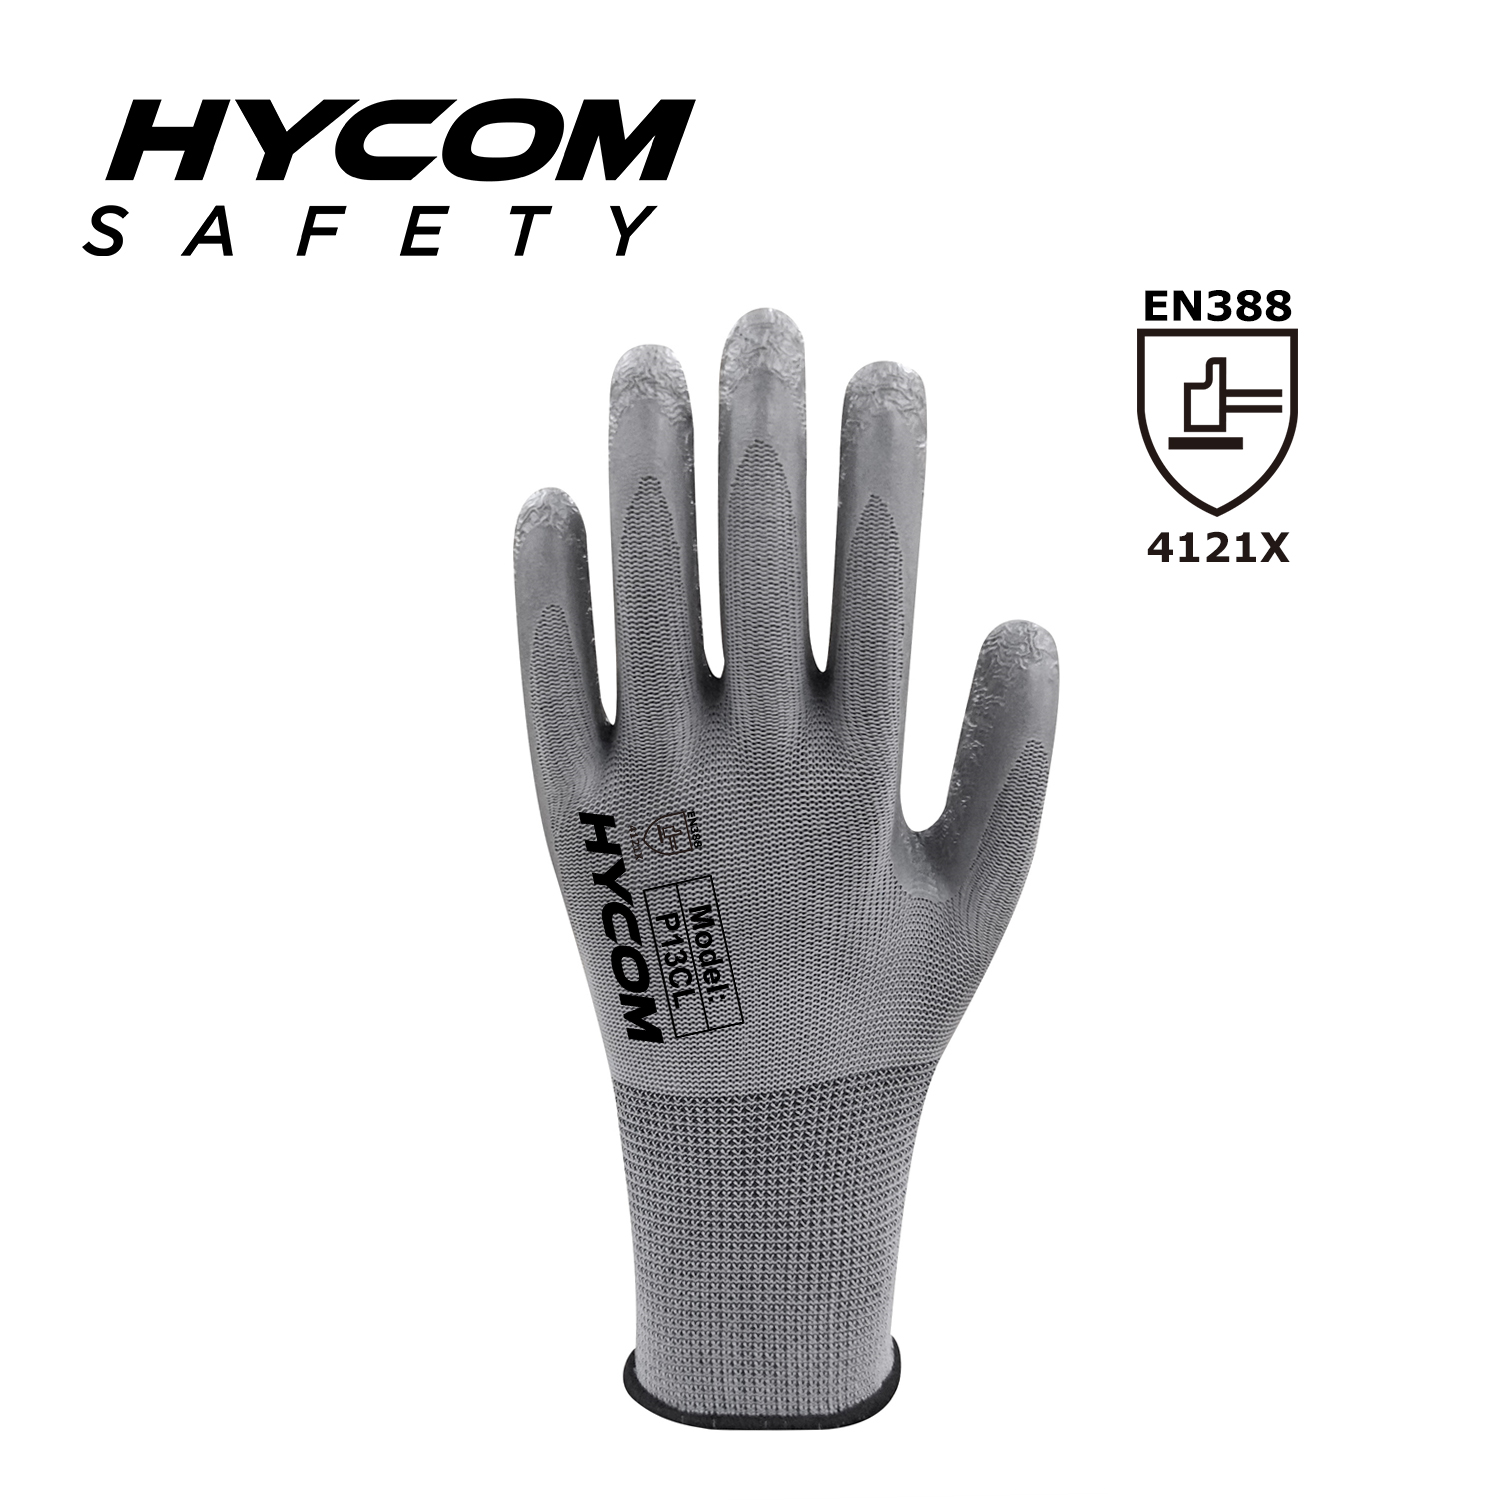 HYCOM 13G Polyester Work Glove with Palm Crinkle Latex Coating Super Grip Safety Glove